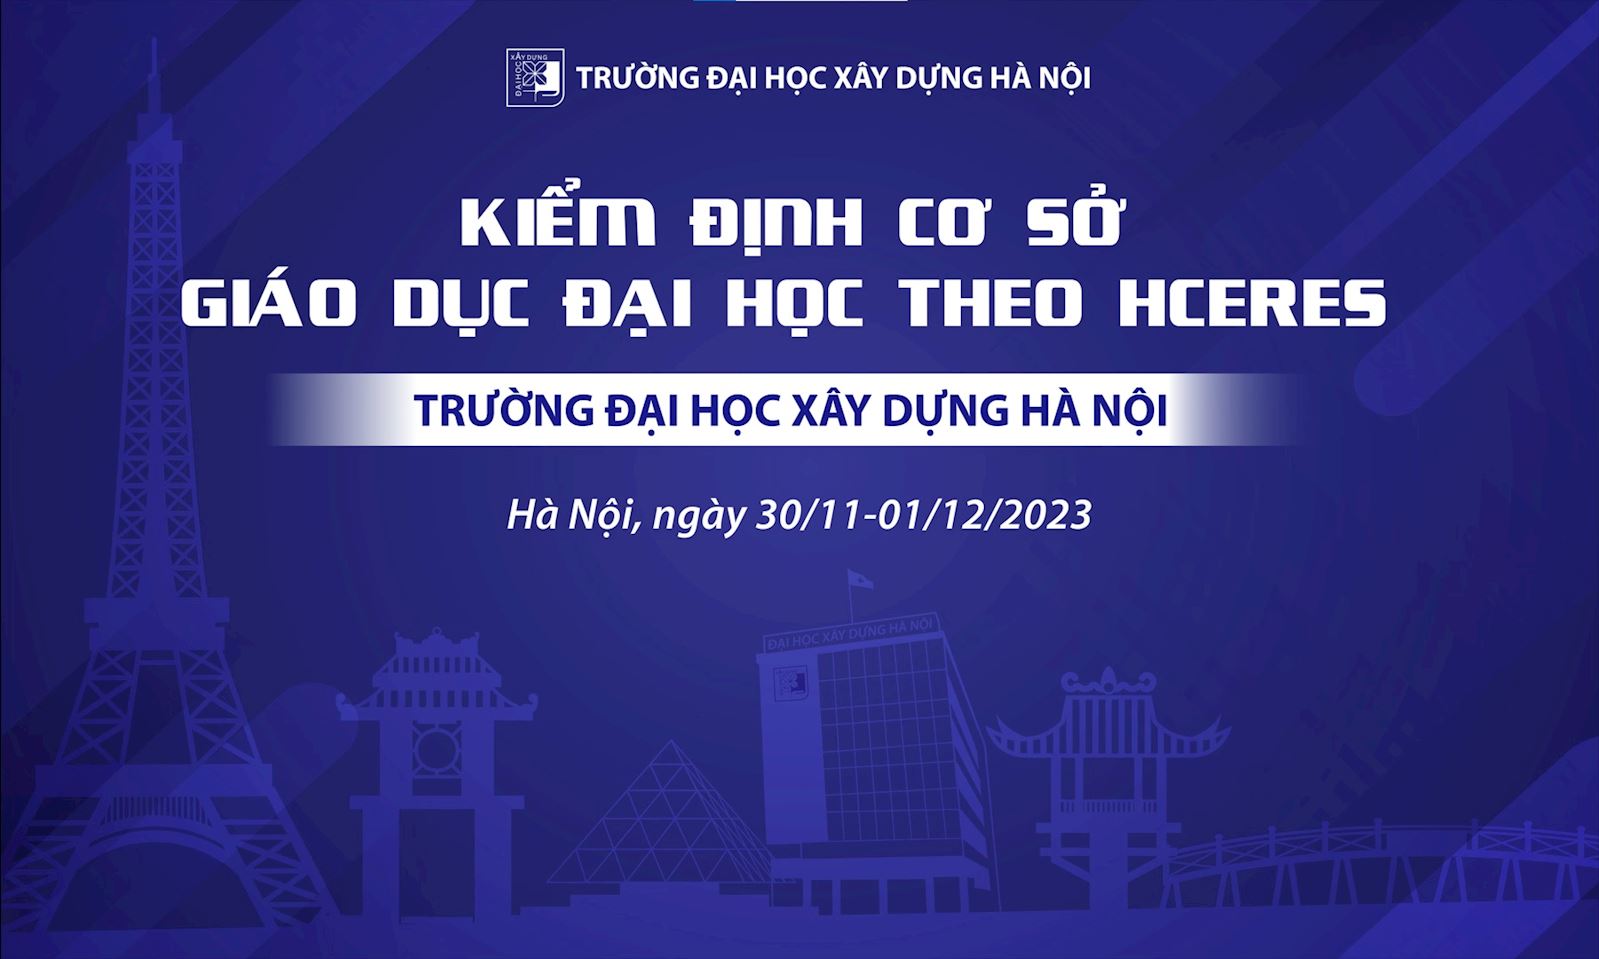 Hanoi University of Civil Engineering prepares for international accreditation by the High Council for Evaluation of Research and Higher Education (Hcéres)